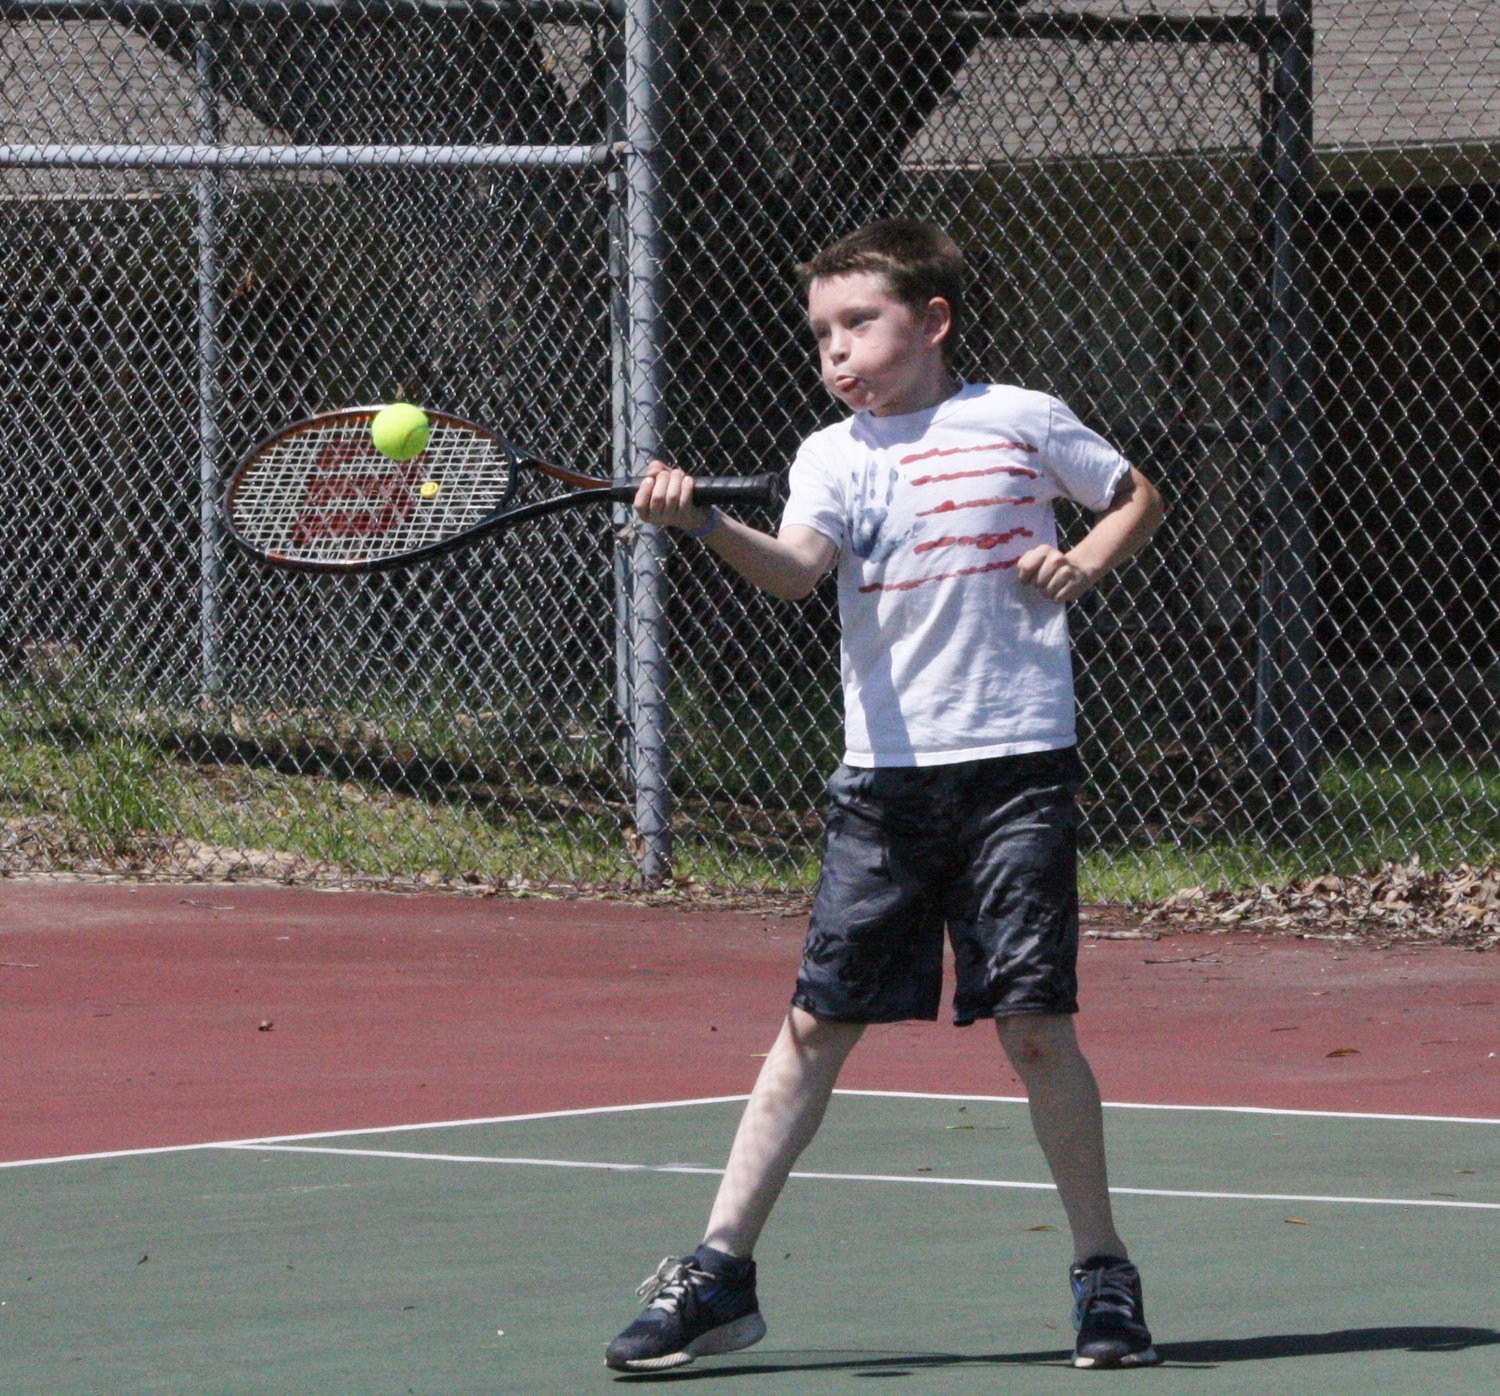 A youngster takes advantage of the great tennis courts available at the Mineola Civic Center grounds.